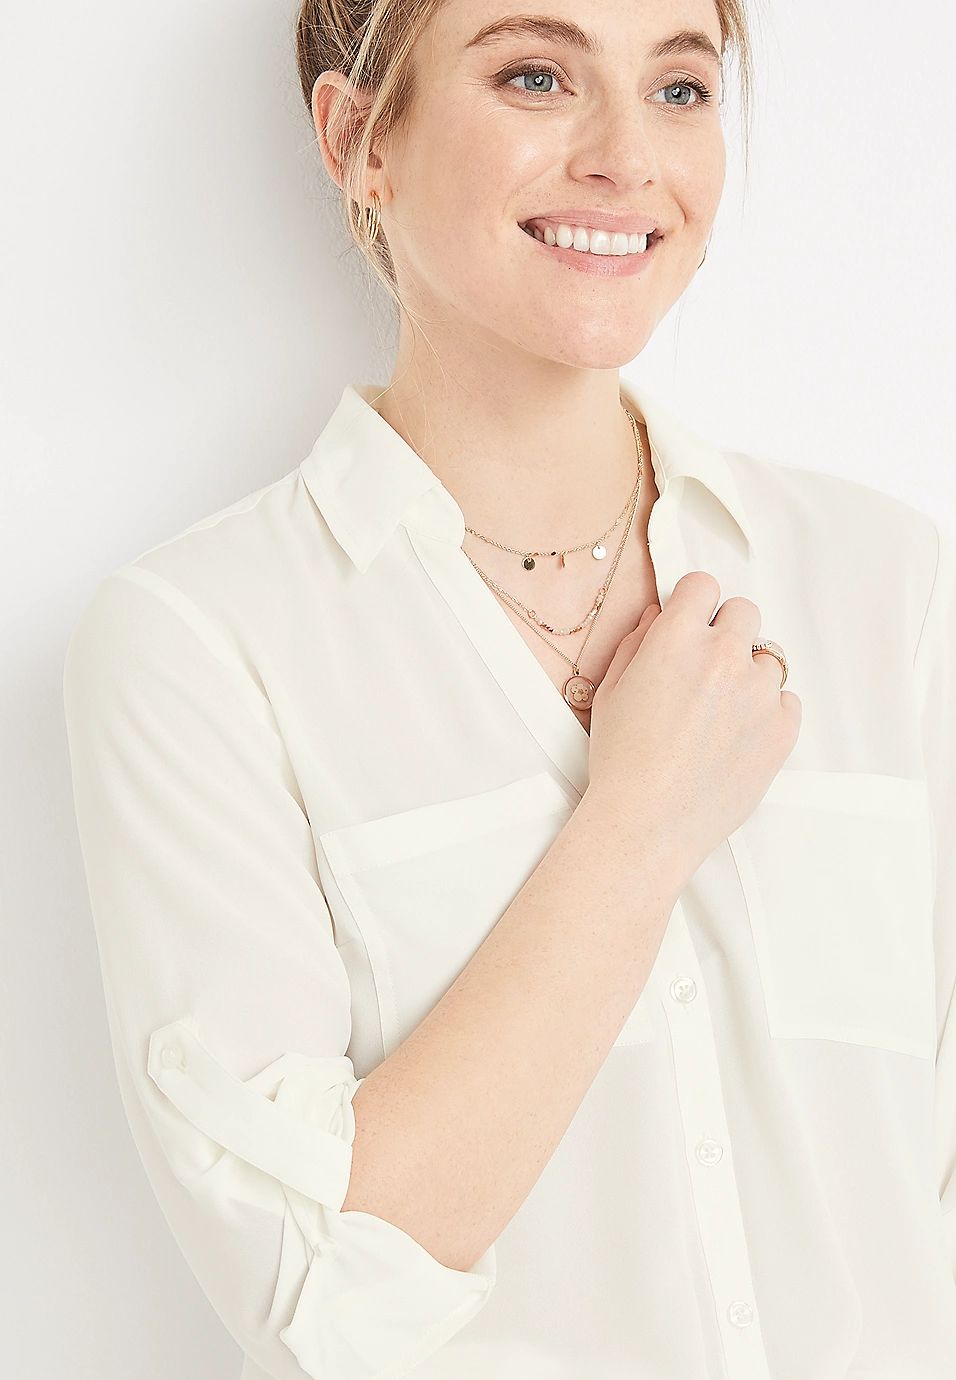 Winona Button Down Blouse | Maurices